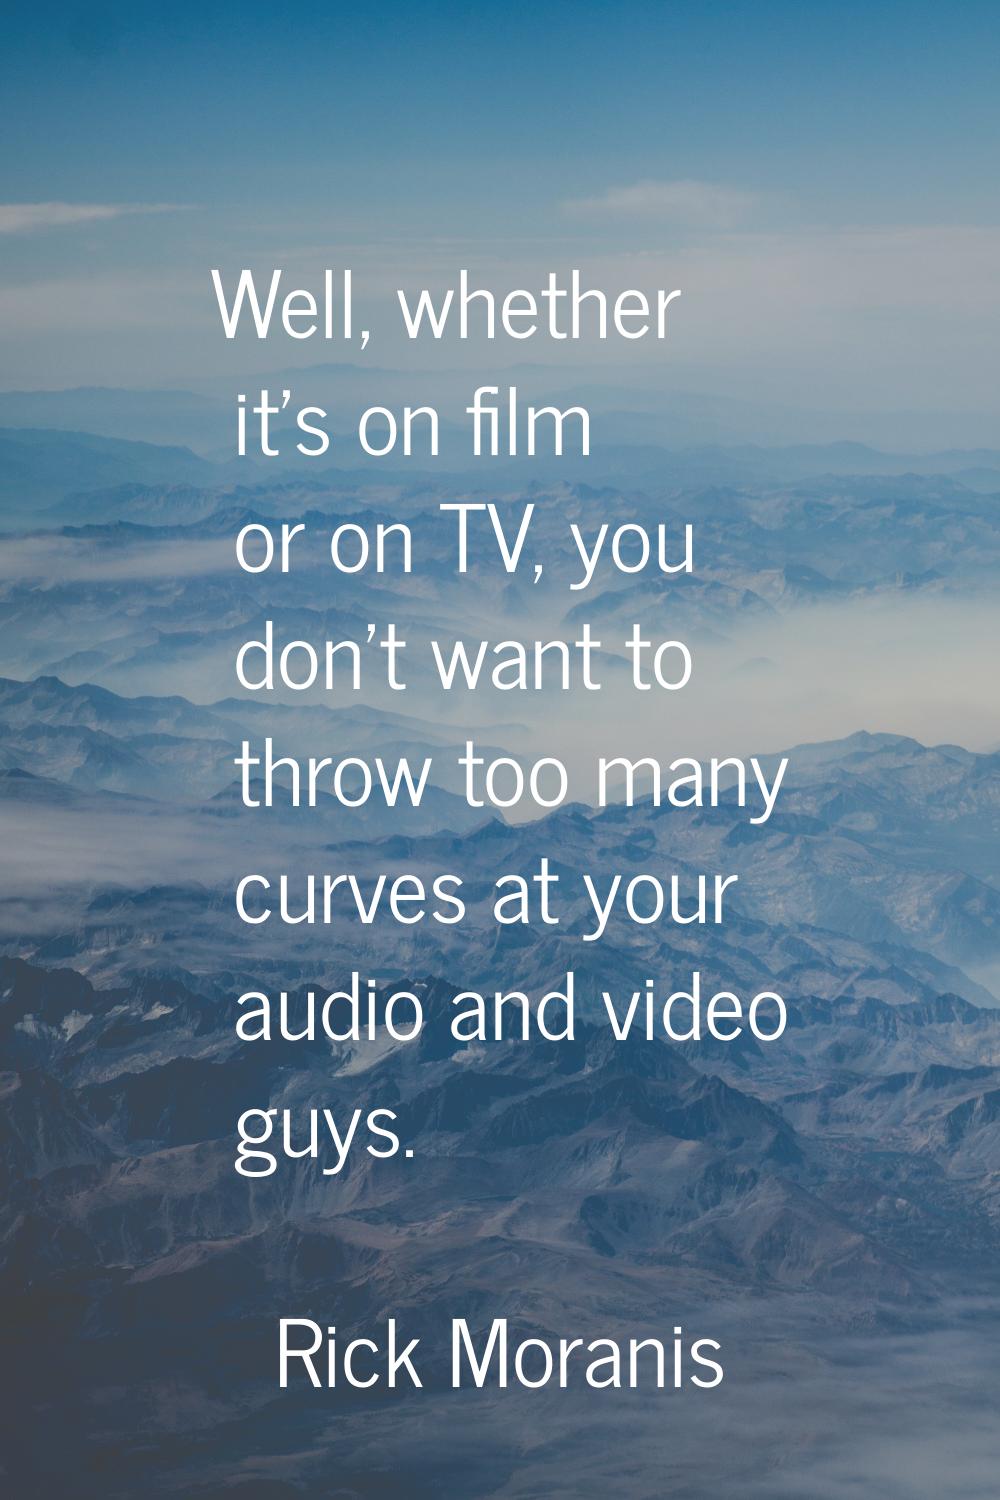 Well, whether it's on film or on TV, you don't want to throw too many curves at your audio and vide